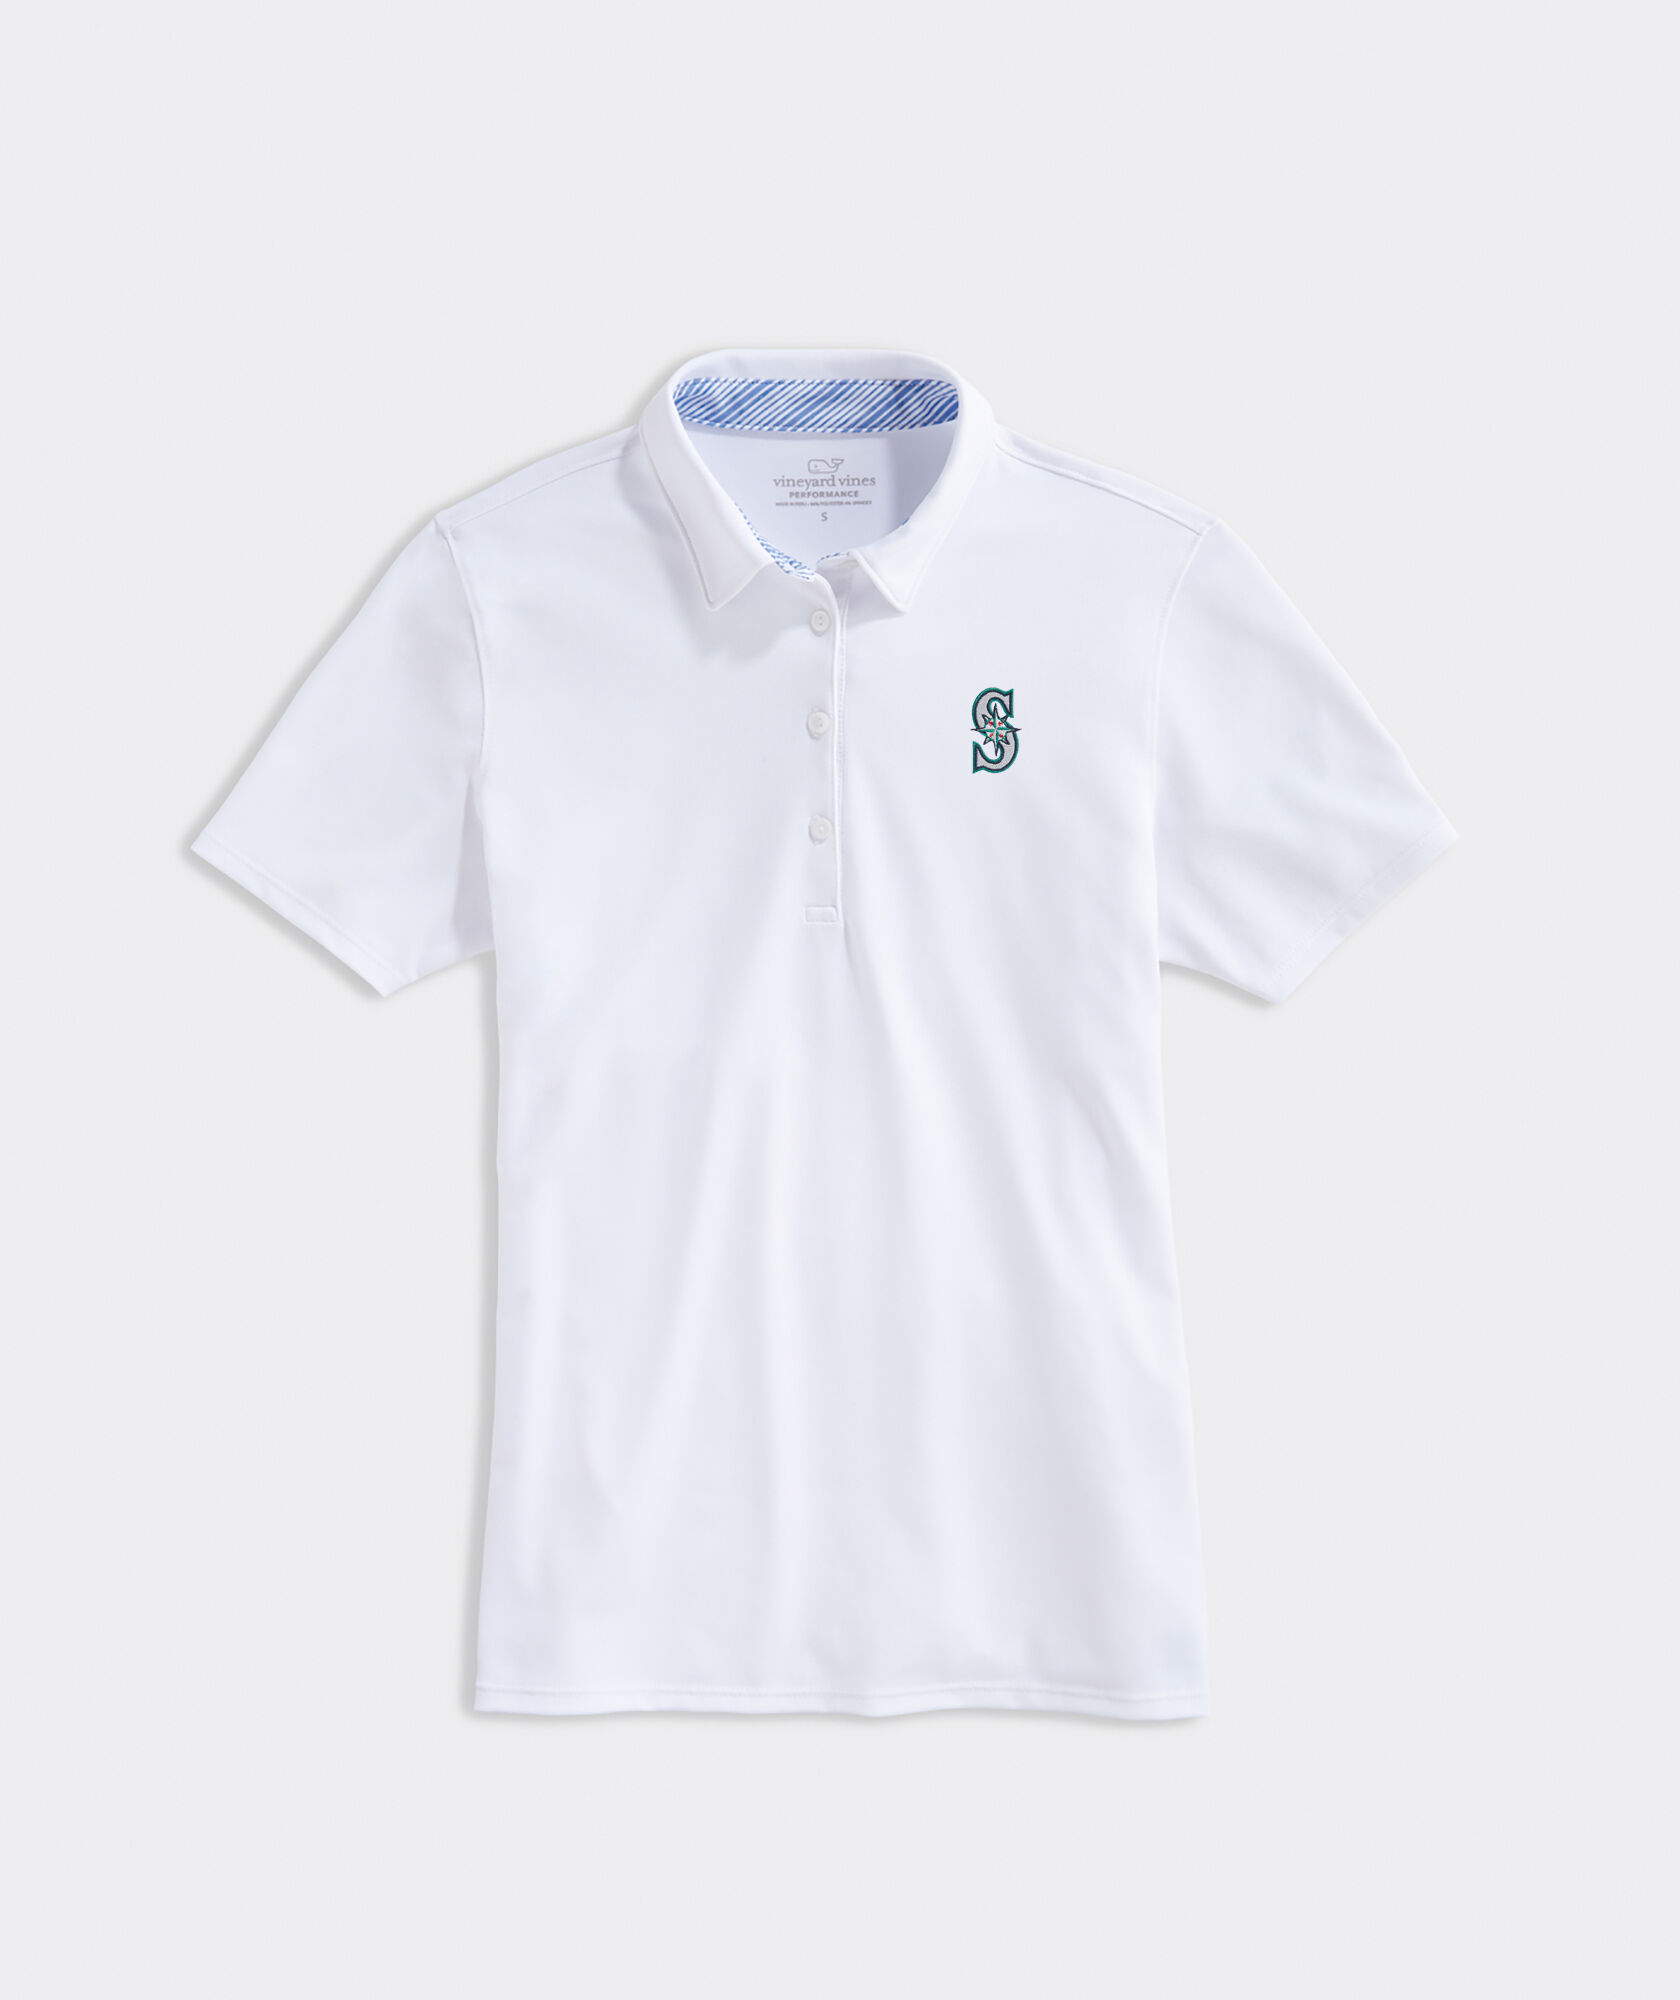 Women's Seattle Mariners Pique Polo